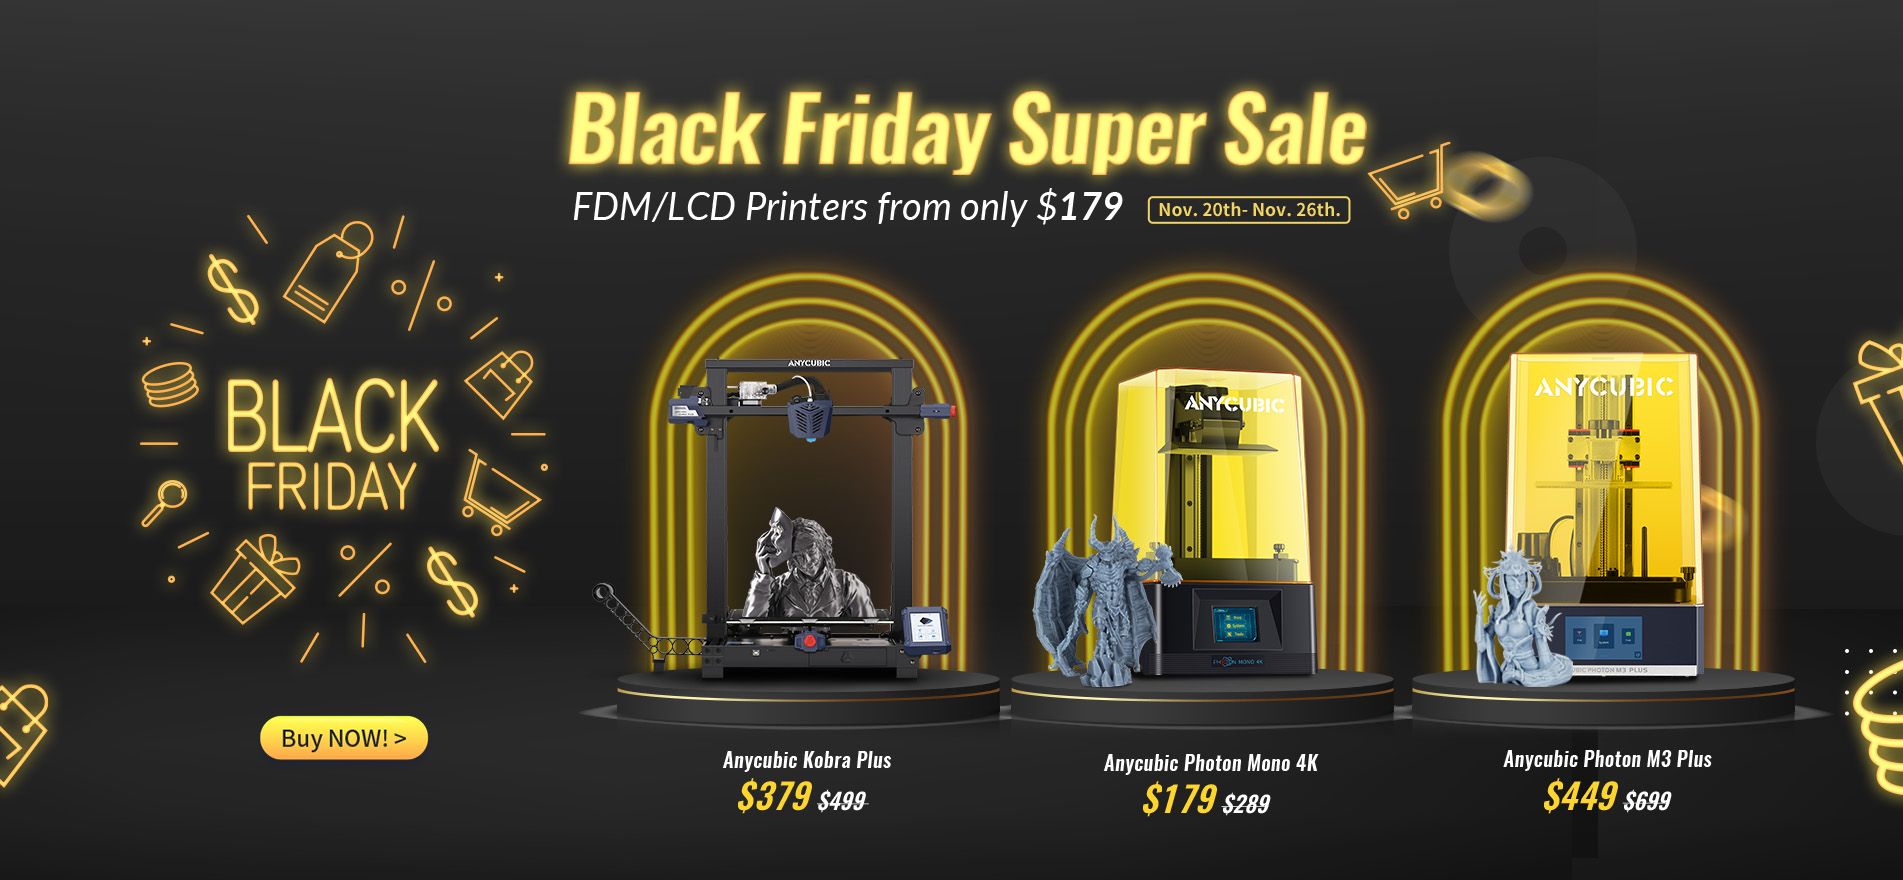 Anycubic black friday